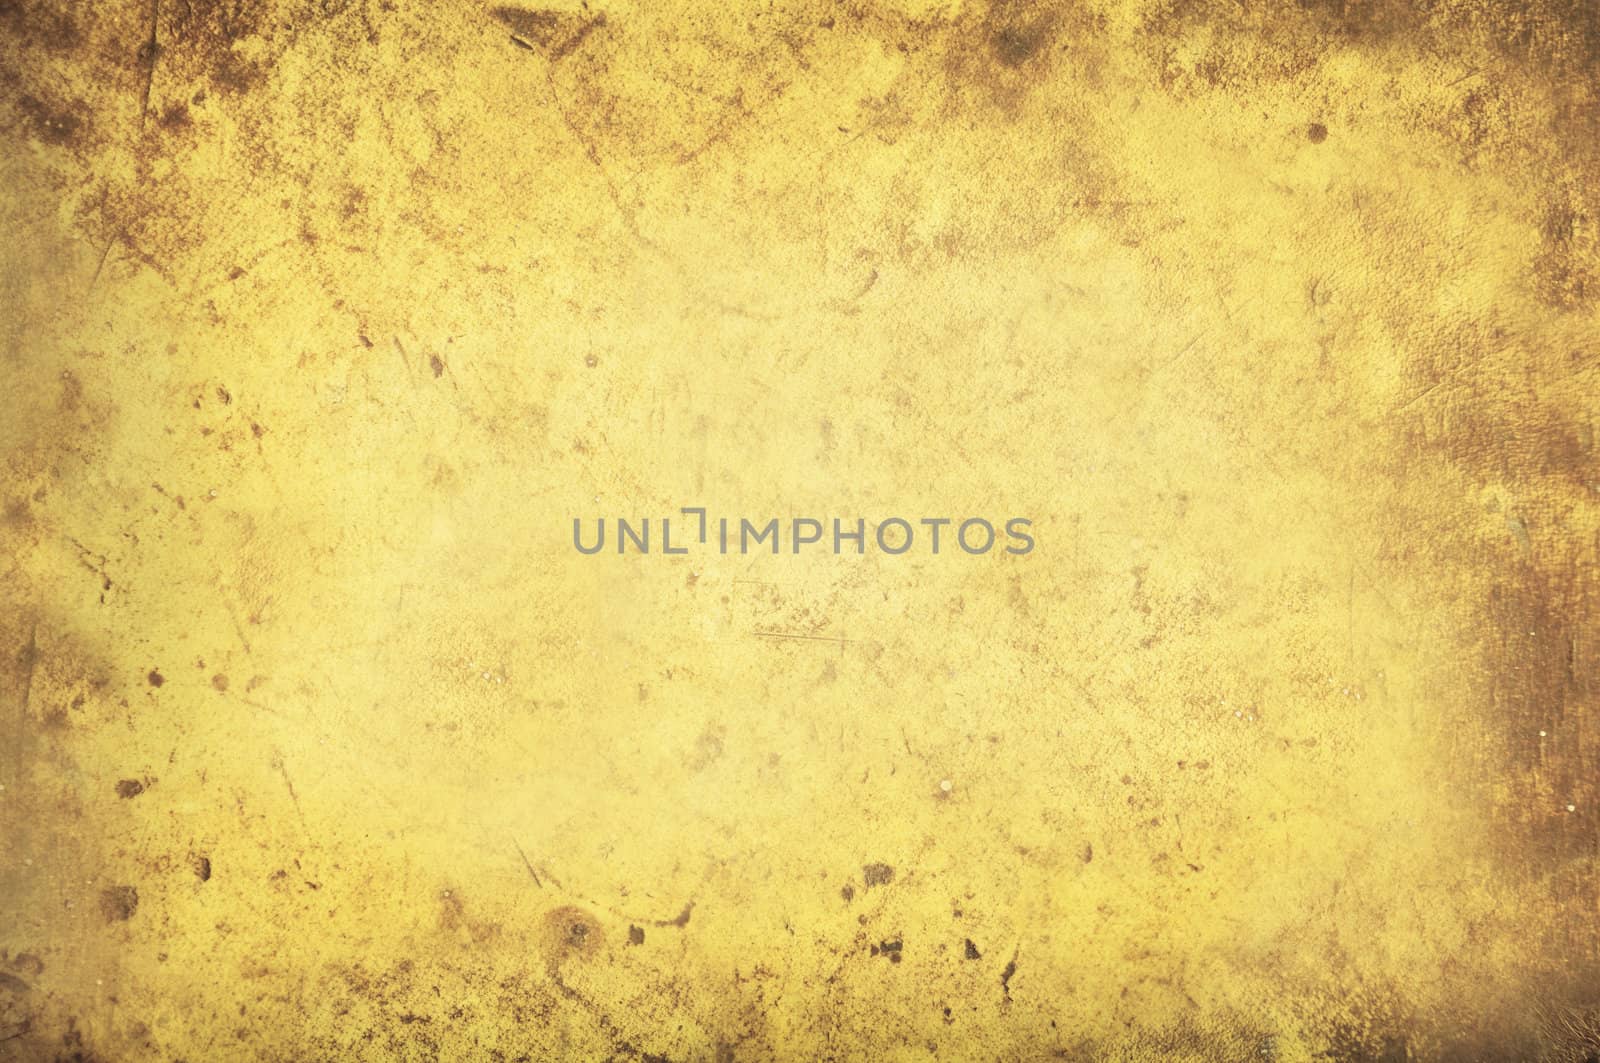 Grungy yellow background texture by Balefire9